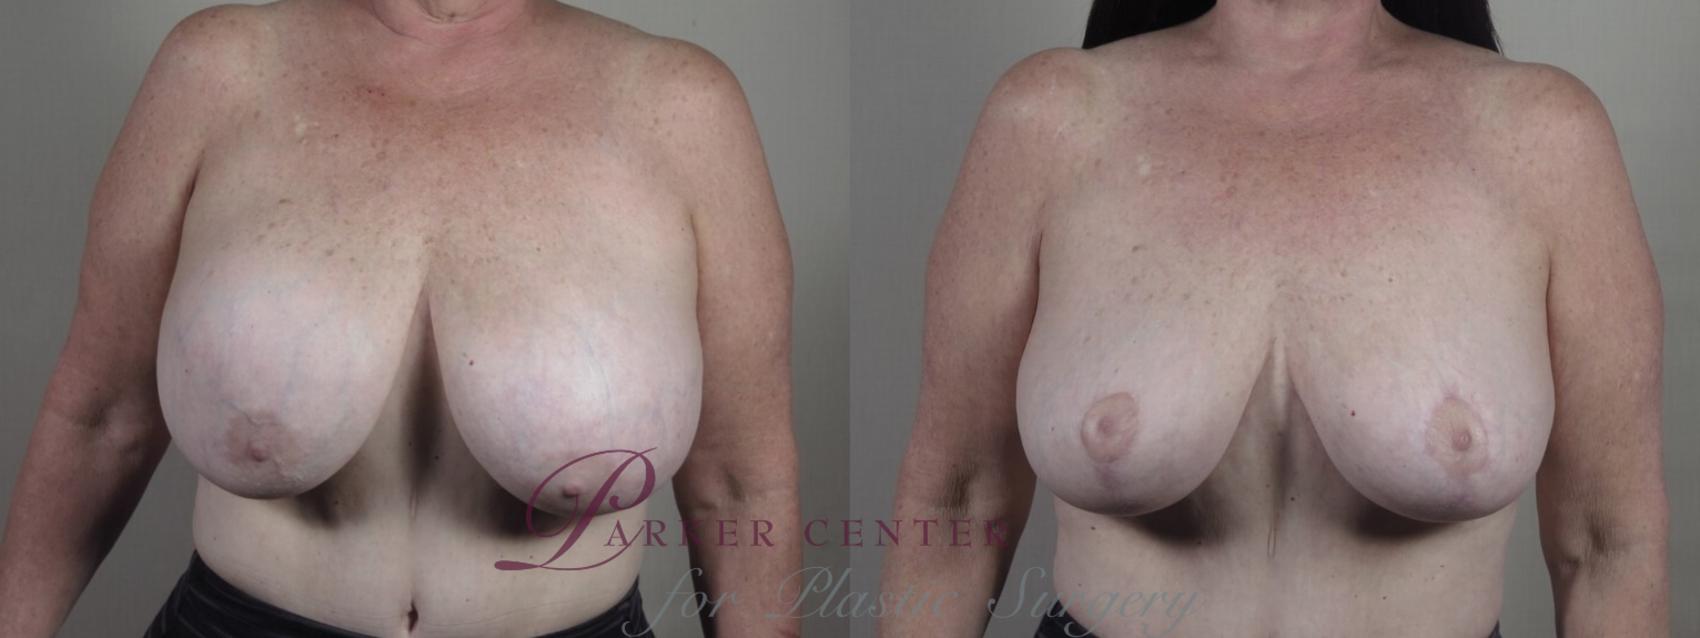 Breast Implant Removal Case 1239 Before & After Front | Paramus, NJ | Parker Center for Plastic Surgery